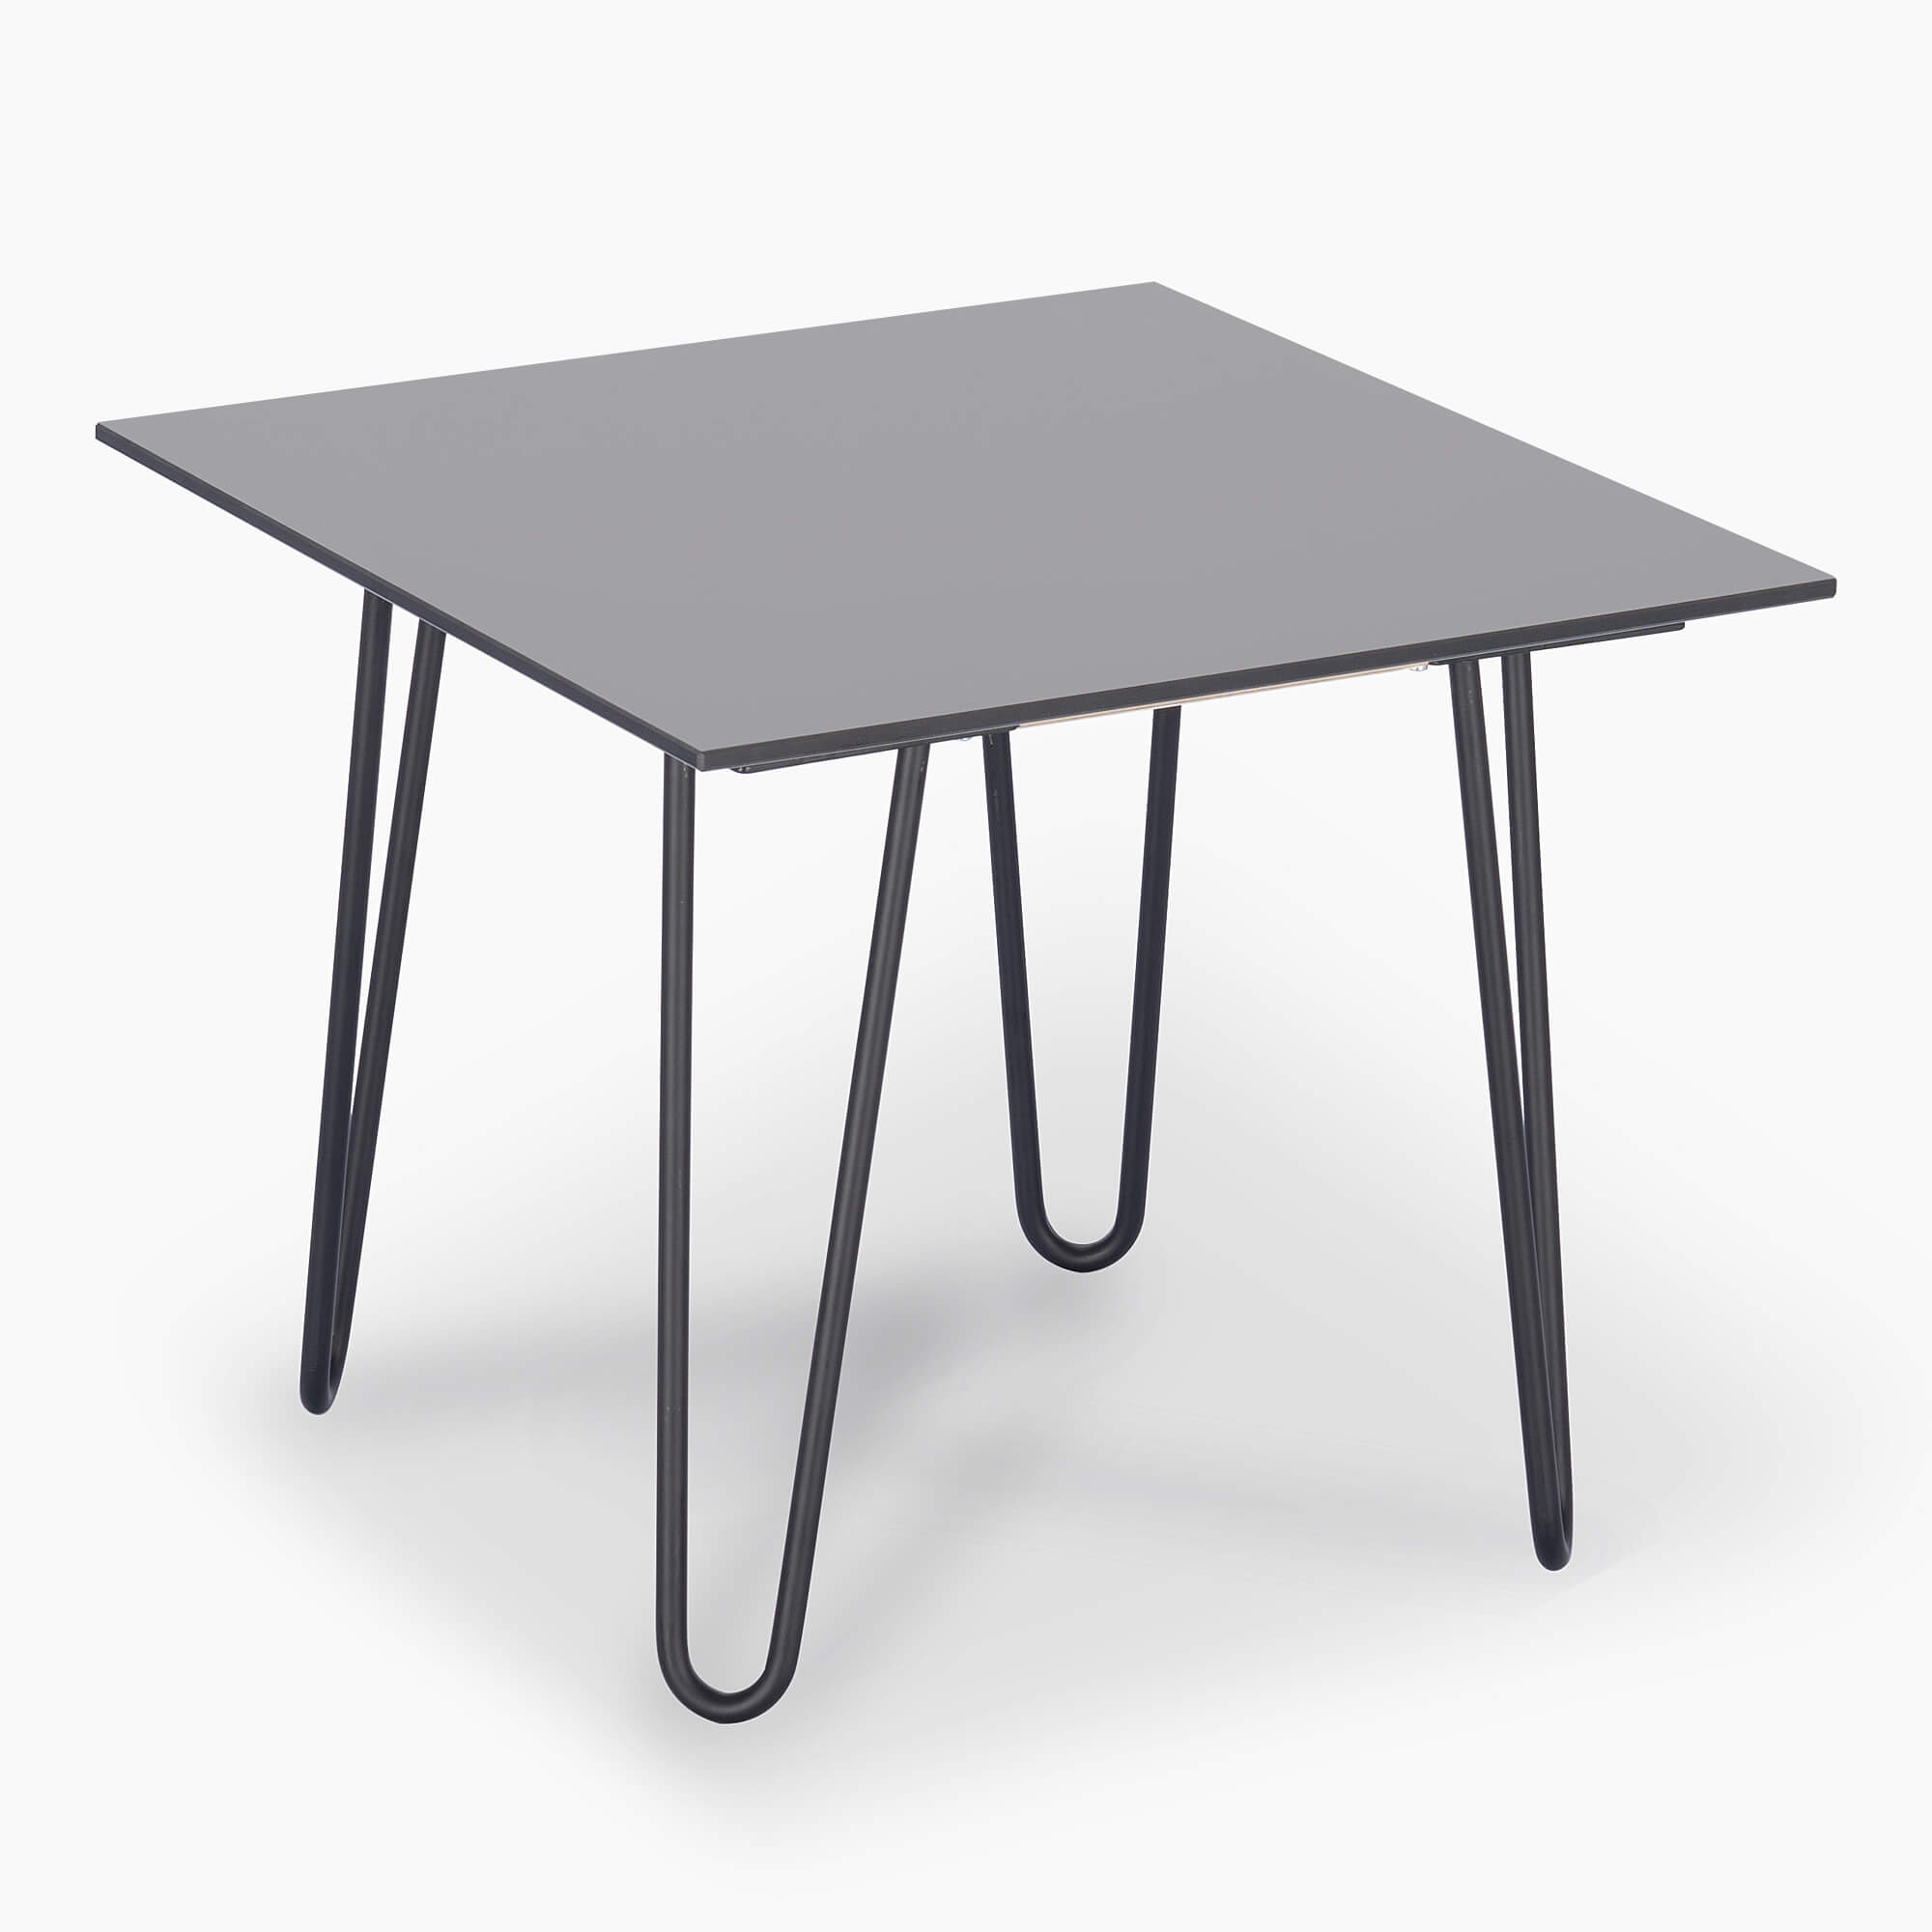 Grey-side-table-square-hairpin-legs-janEven